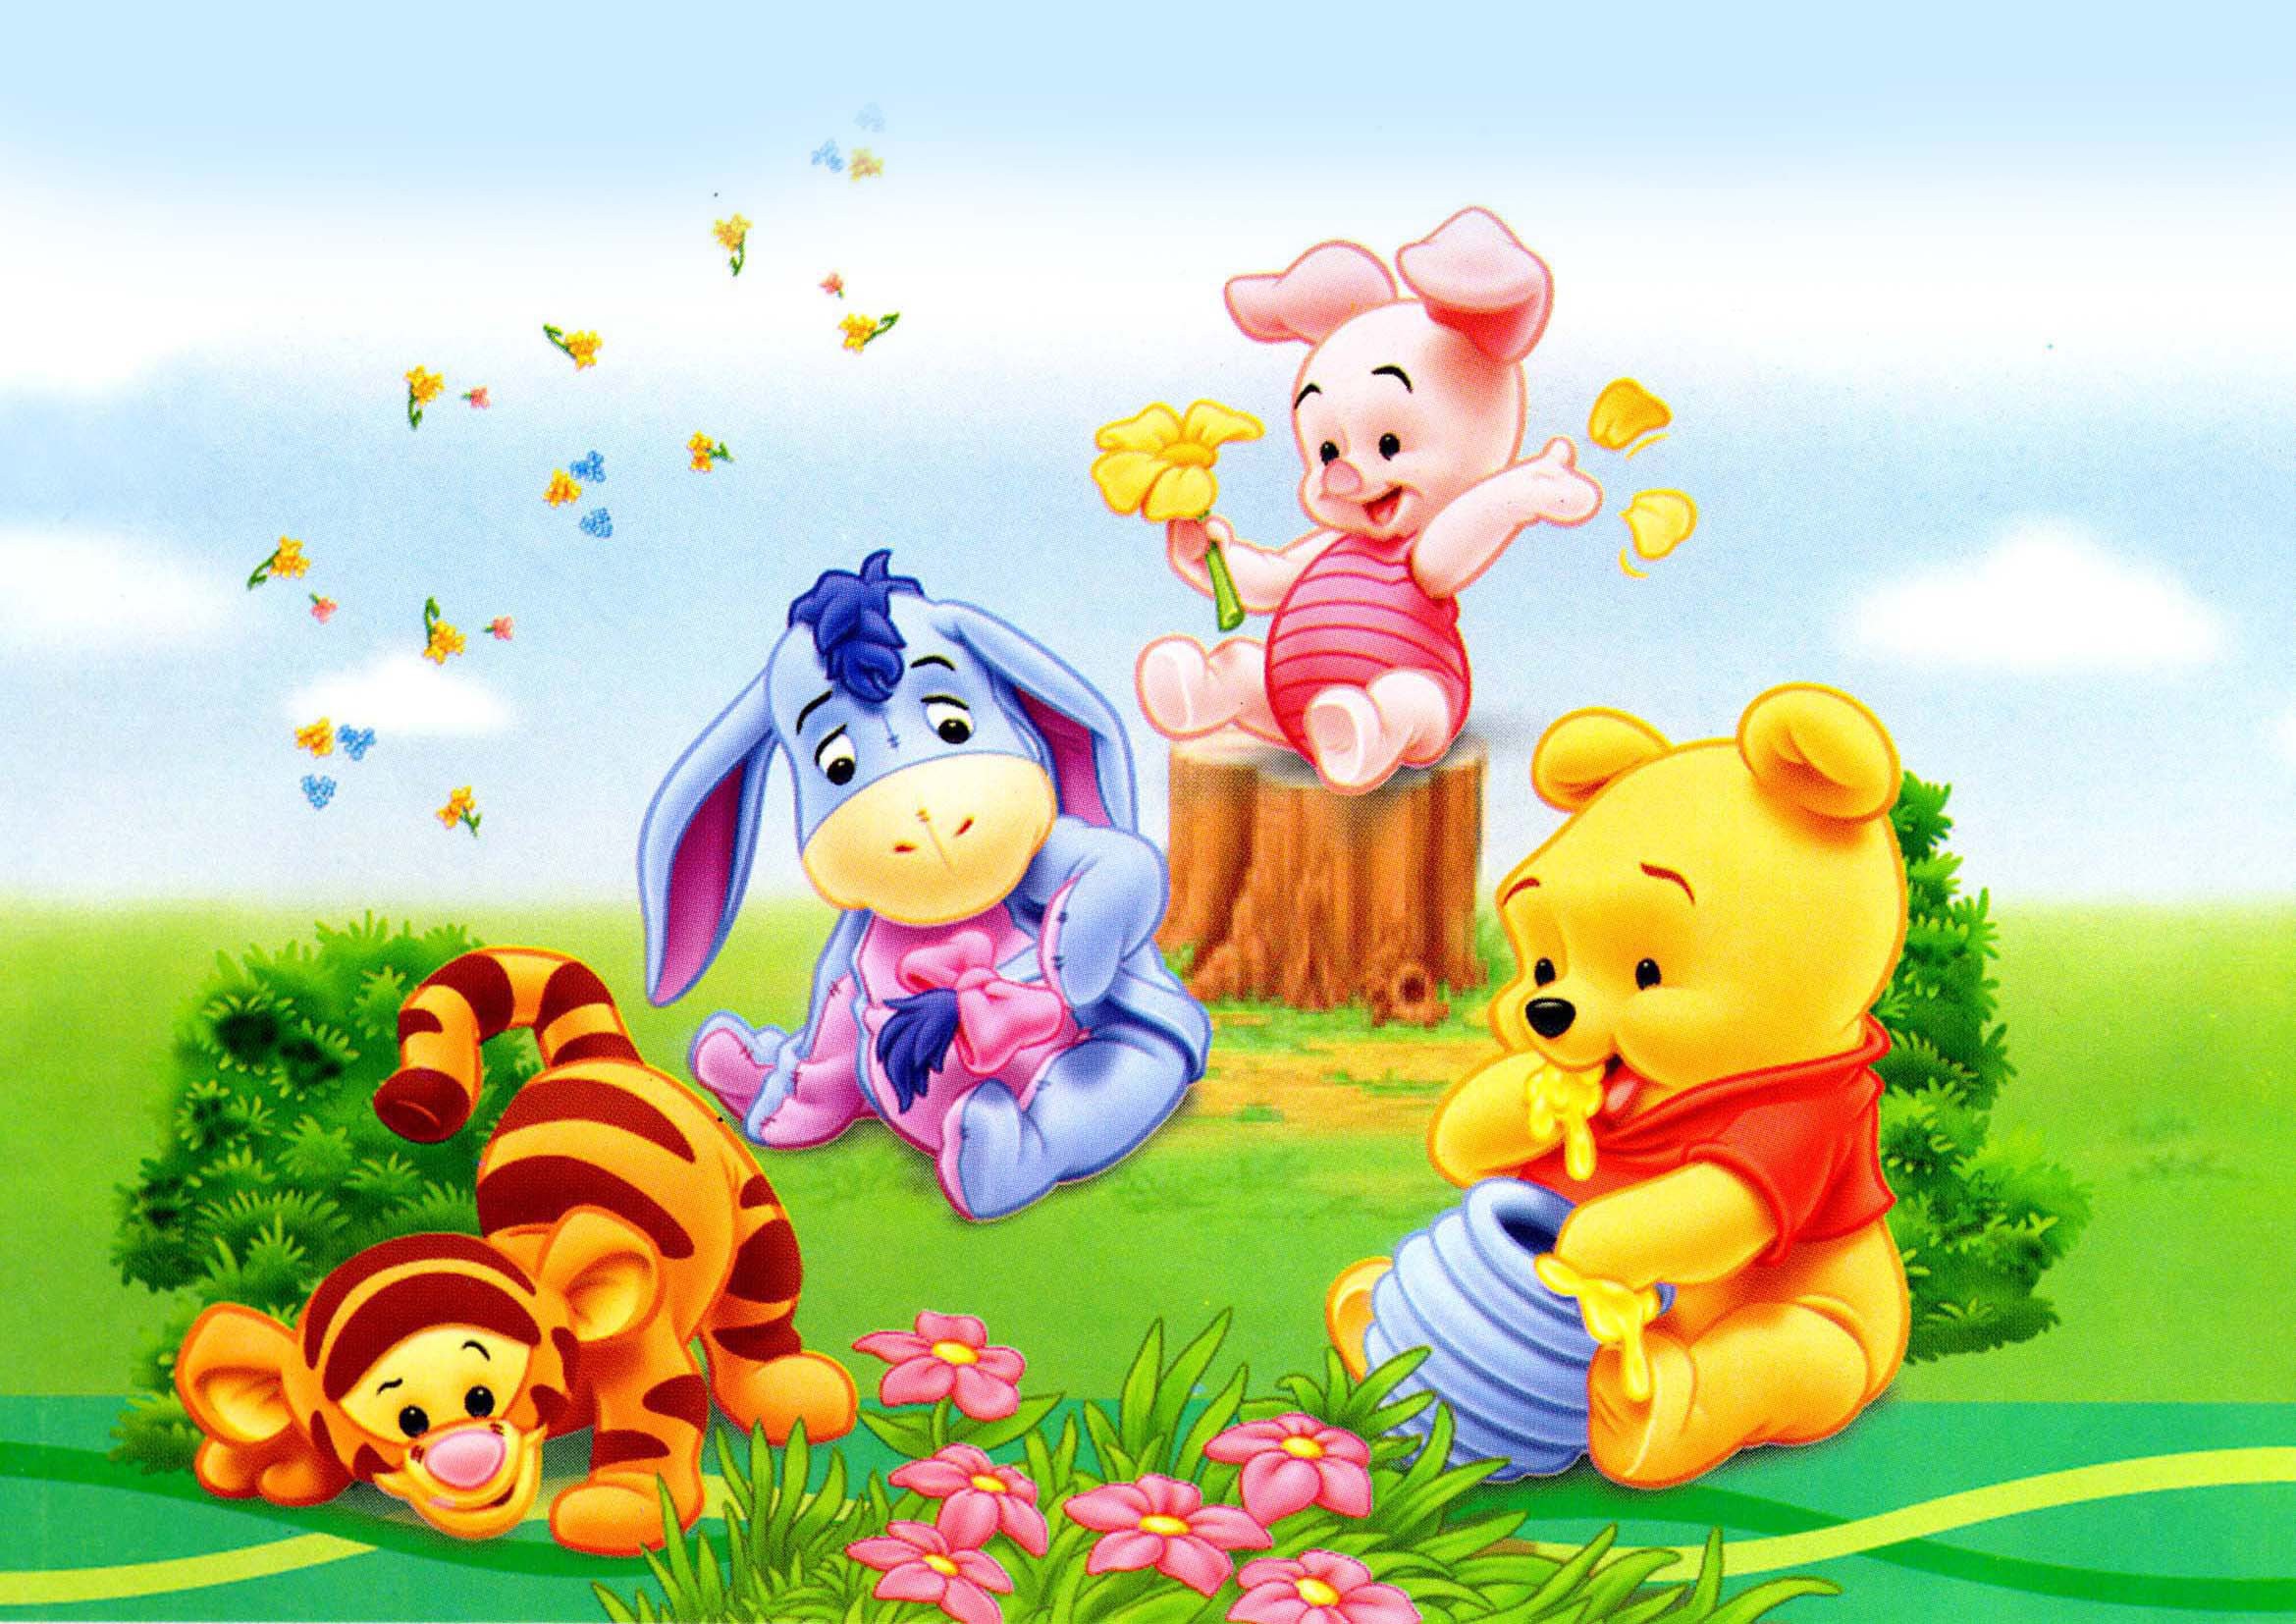 Winnie the Pooh Background Wallpapers WIN10 THEMES